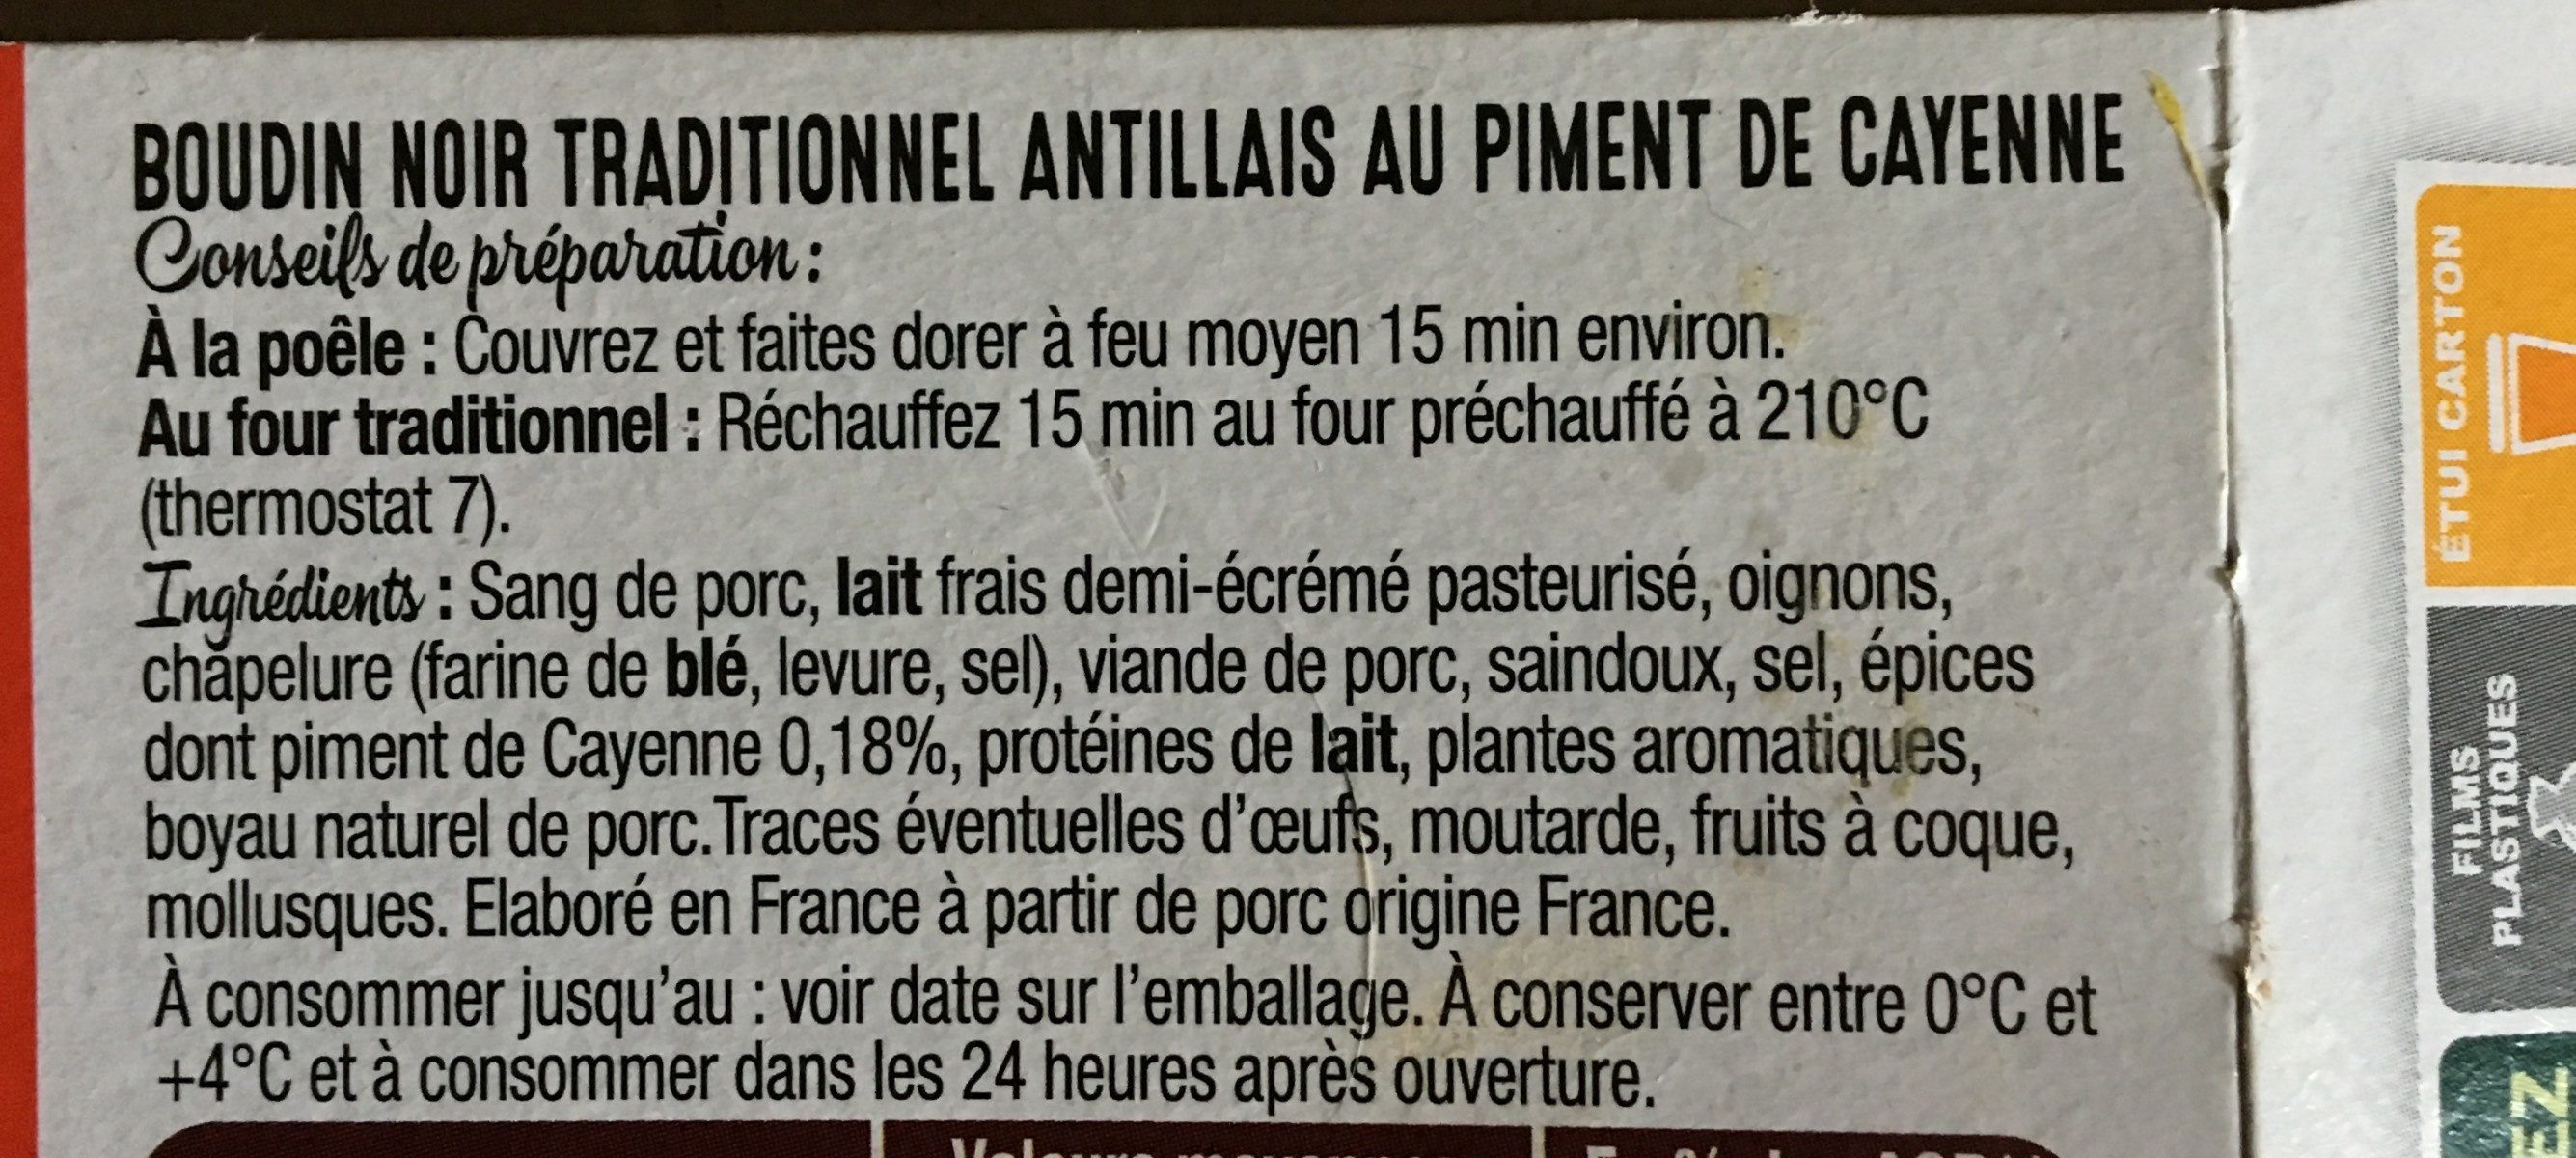 Boudin traditionnel antillais - Ingredients - fr